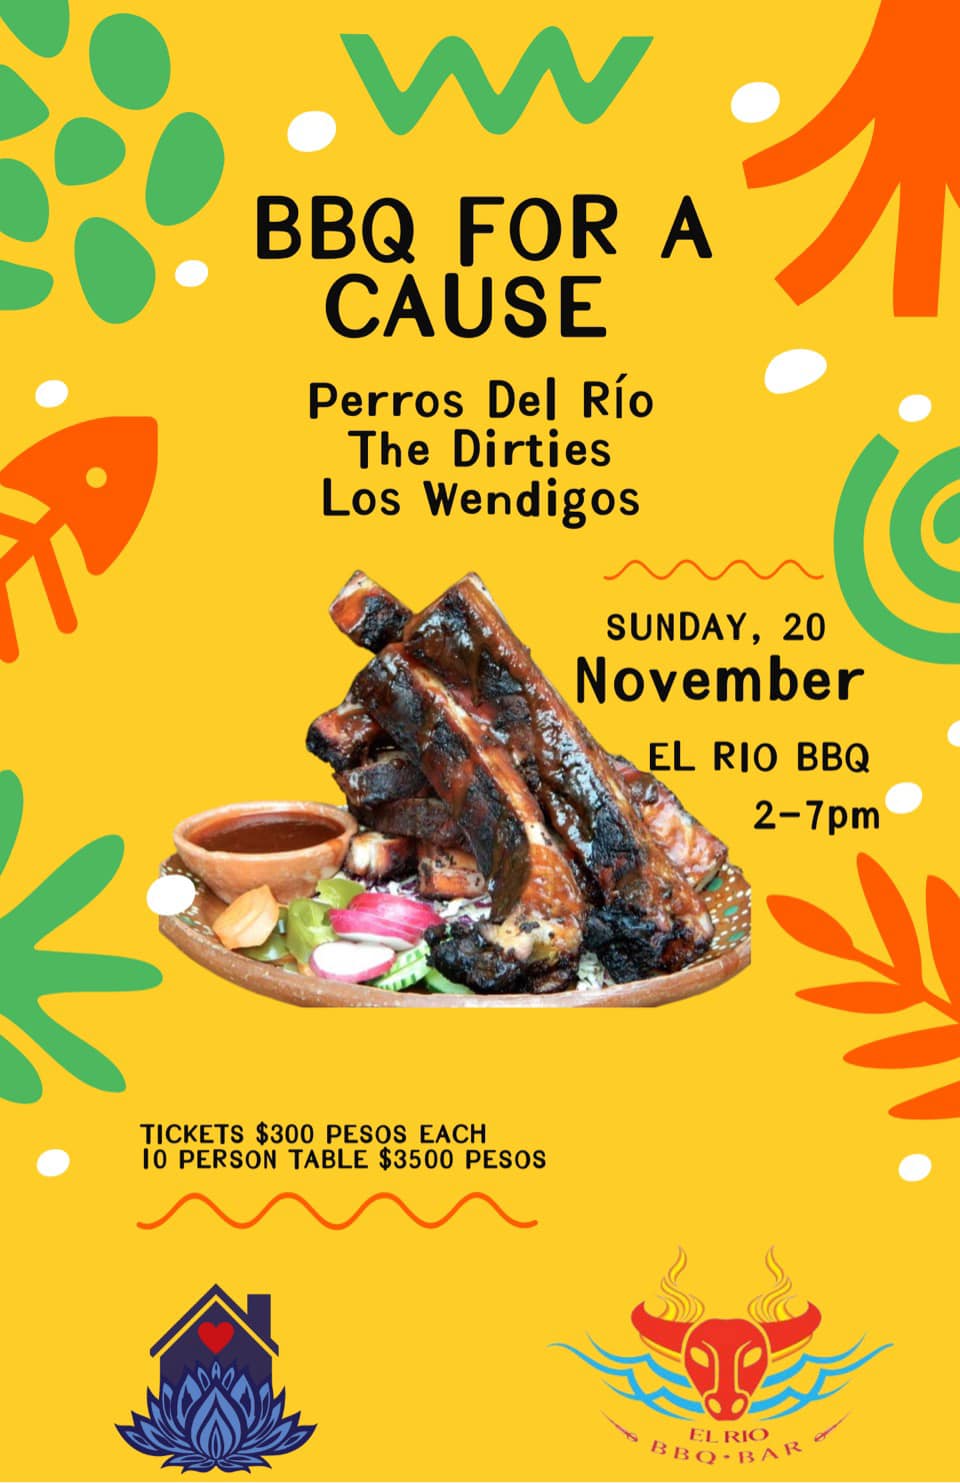 BBQ for a cause